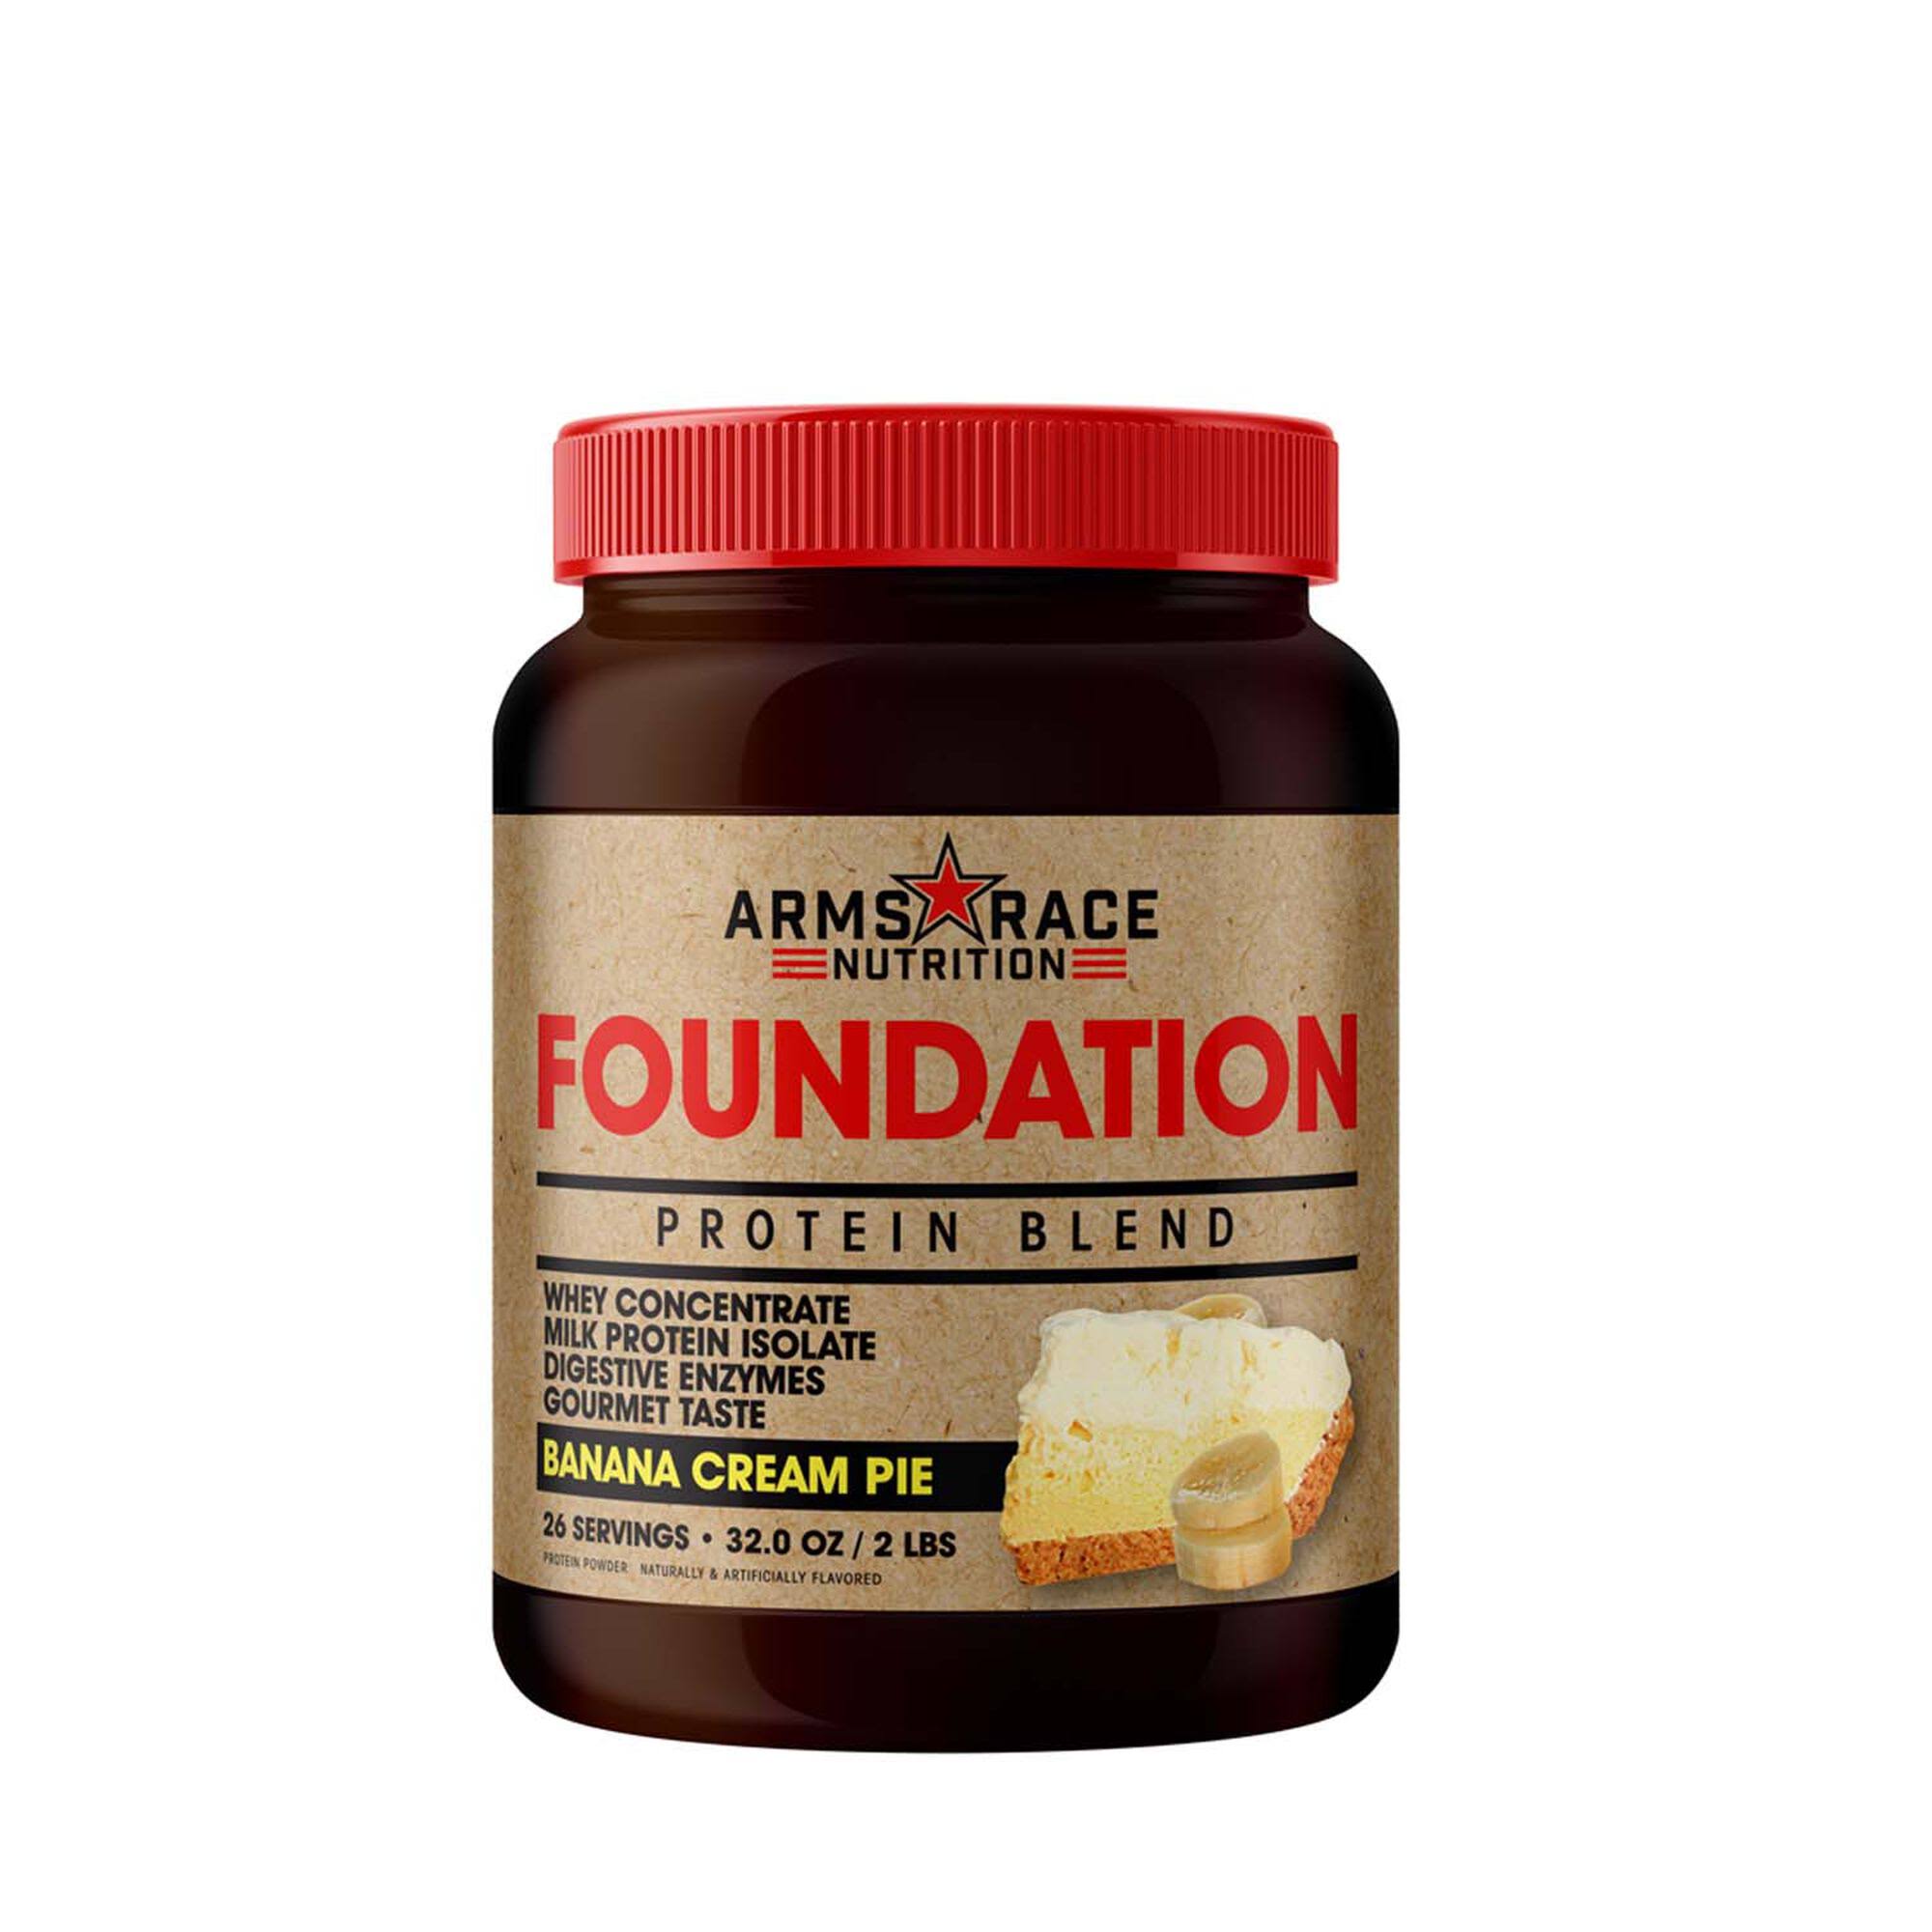 Arms Race Nutrition Foundation Protein Blend - Banana Cream Pie - 26 Servings